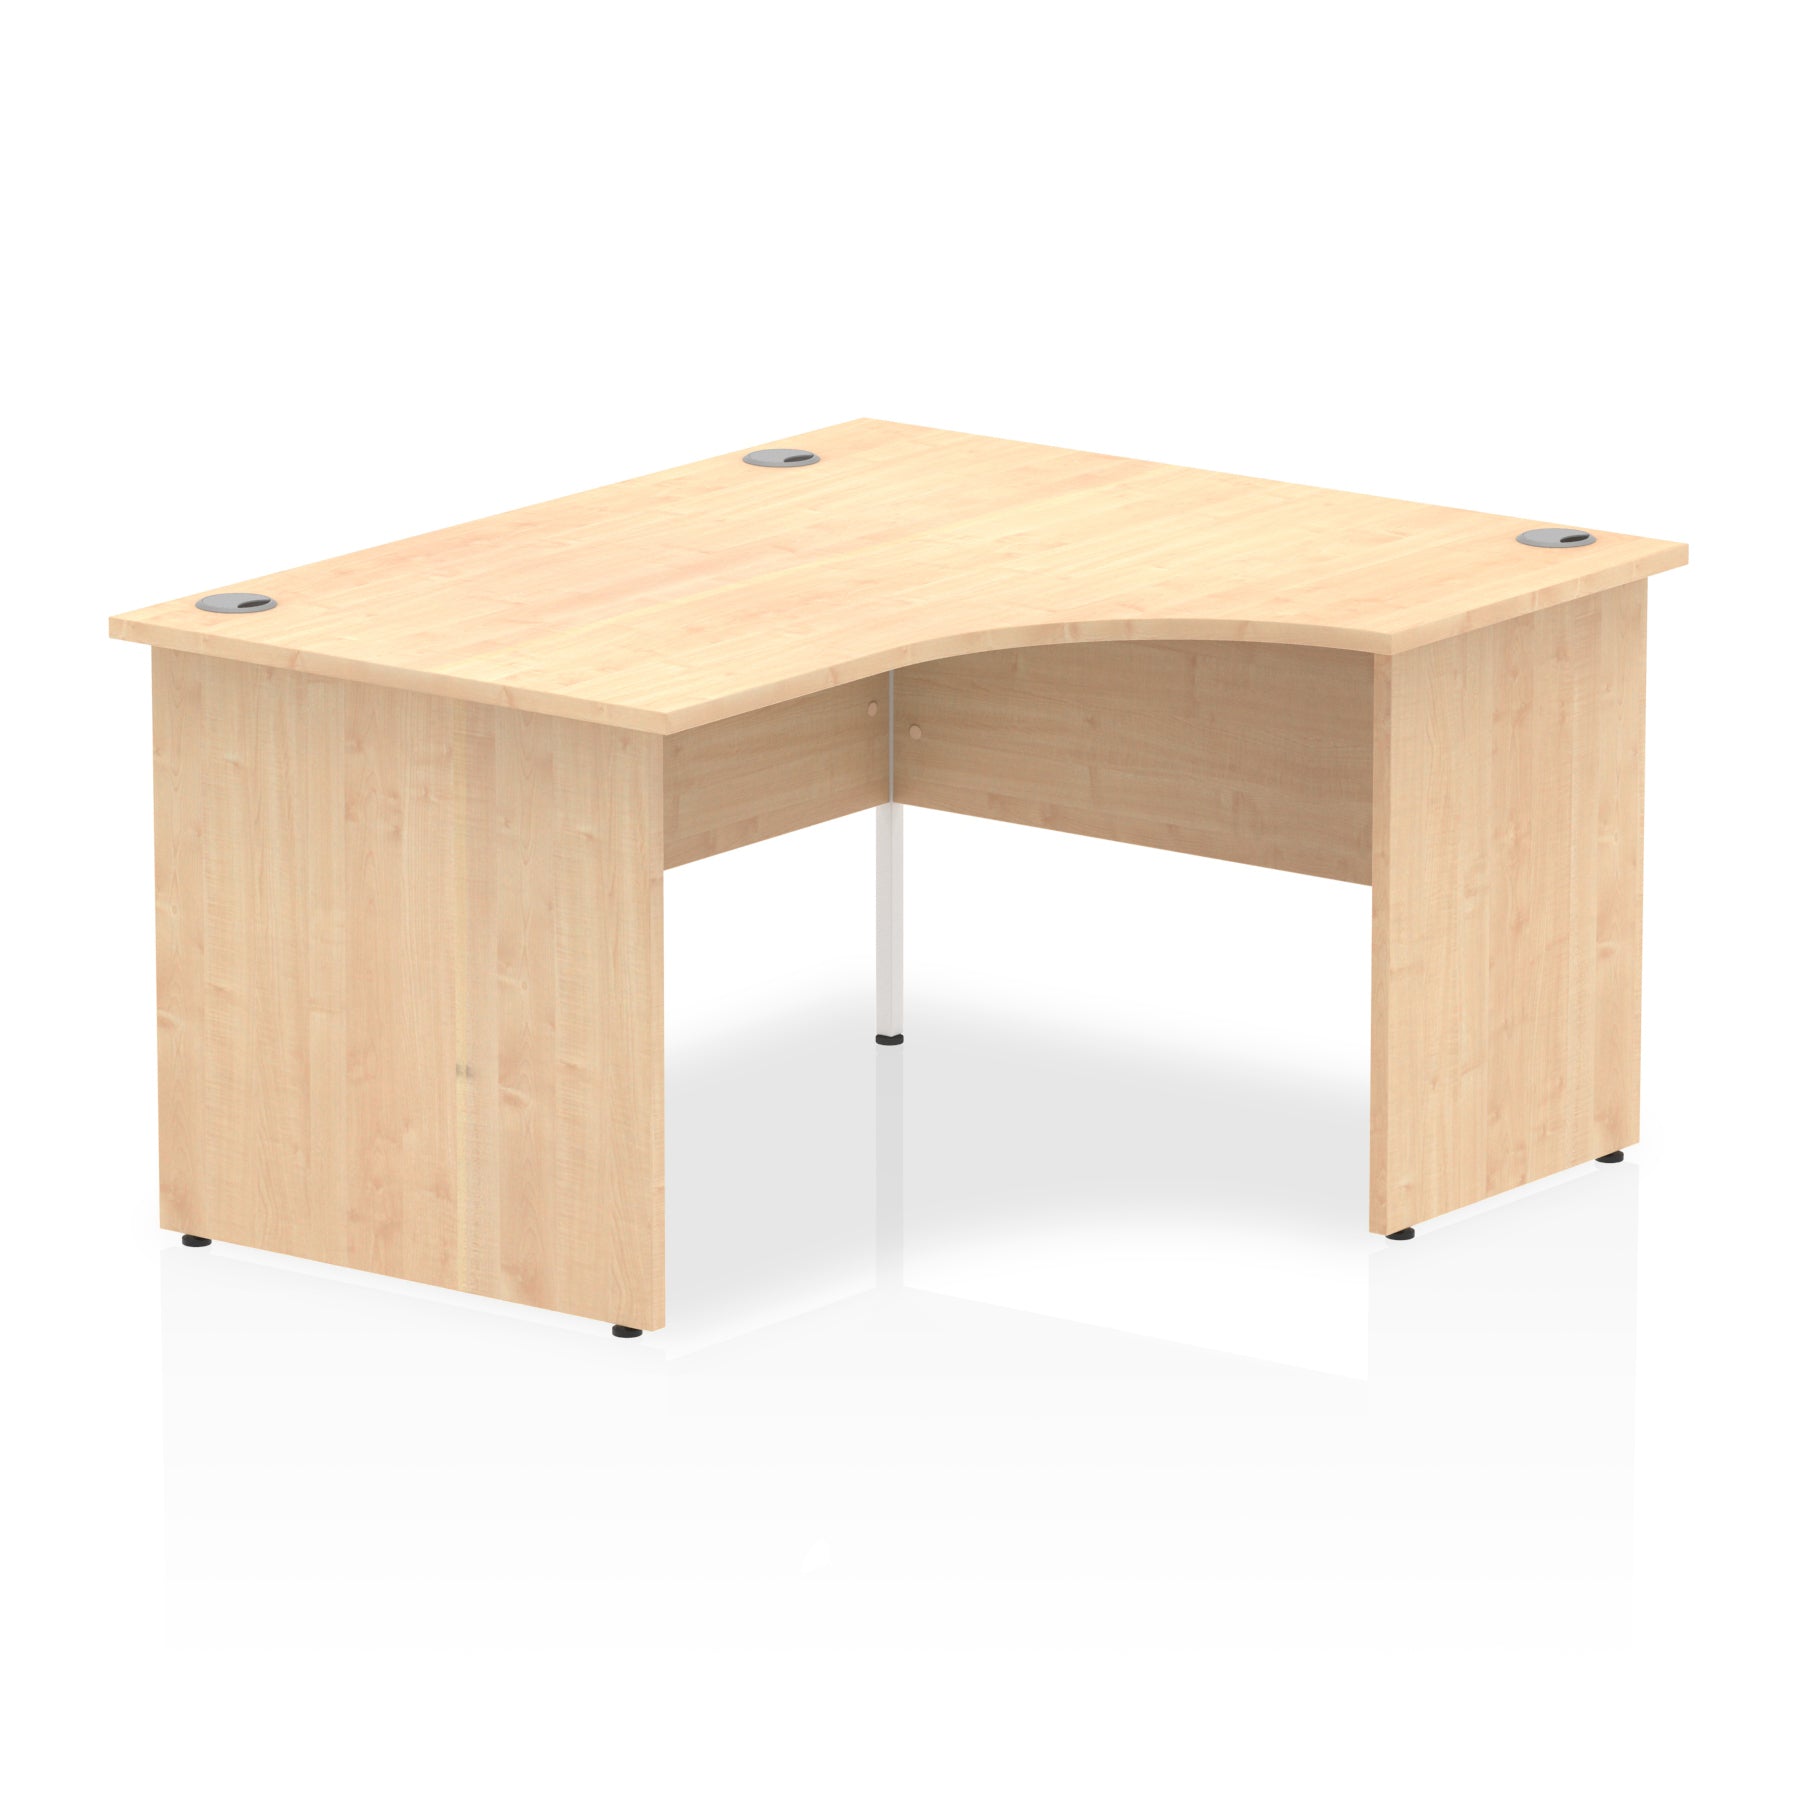 Impulse 1400mm Right Crescent Corner Desk with Panel End Leg - 1400x1200 MFC Top, Self-Assembly, 5-Year Guarantee, White Frame